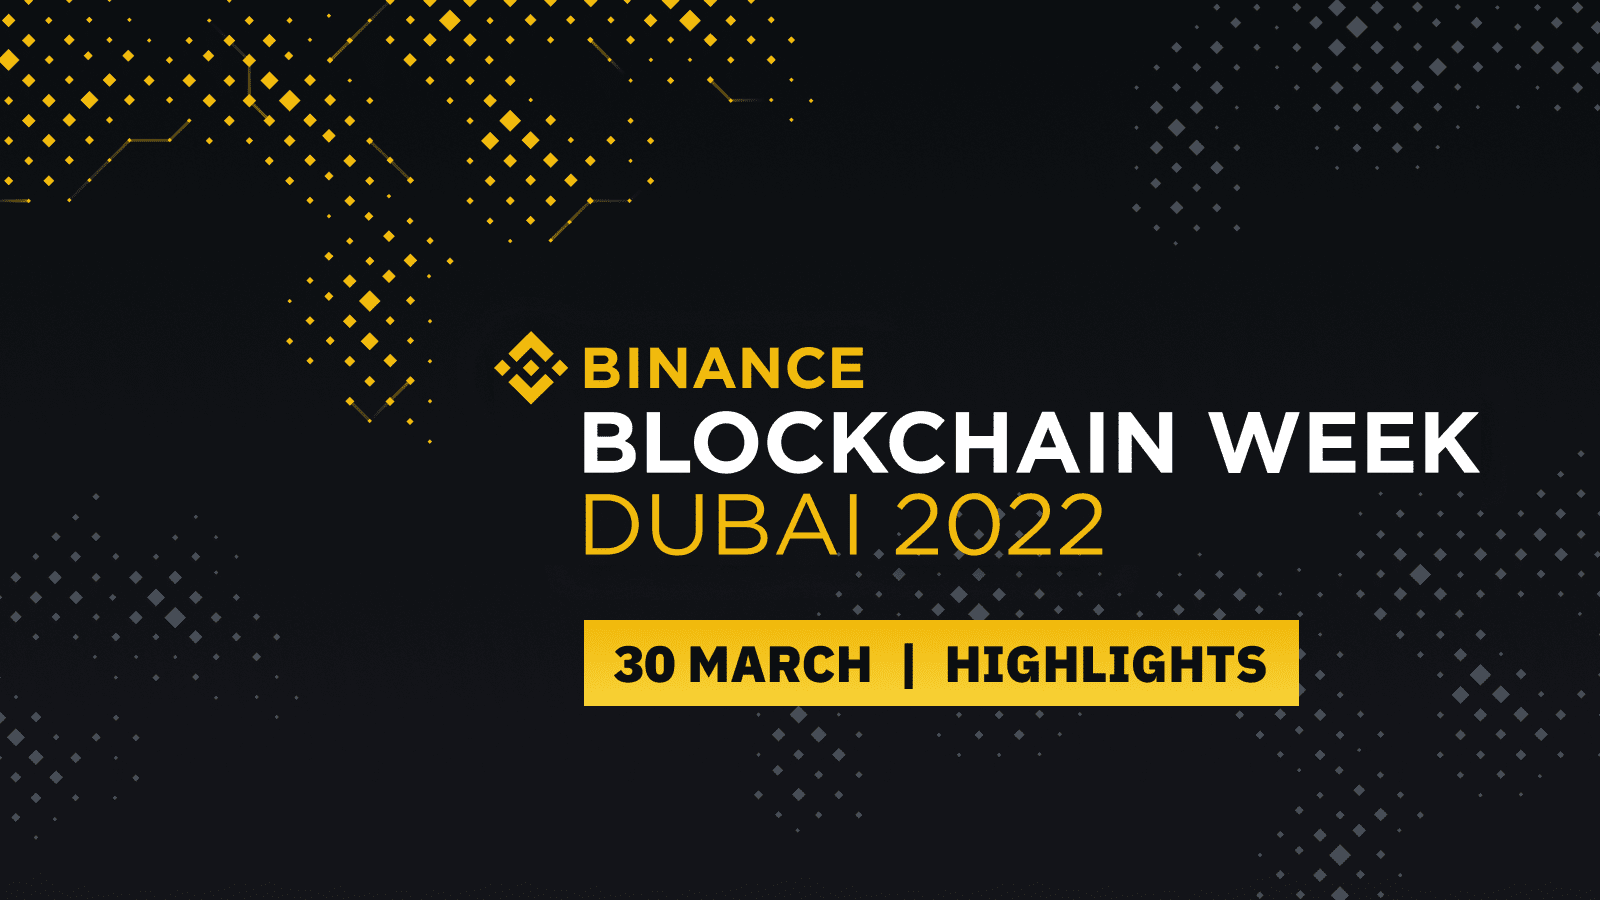 The future of crypto investing and fundraising: Day 3 of Binance Blockchain Week 2022